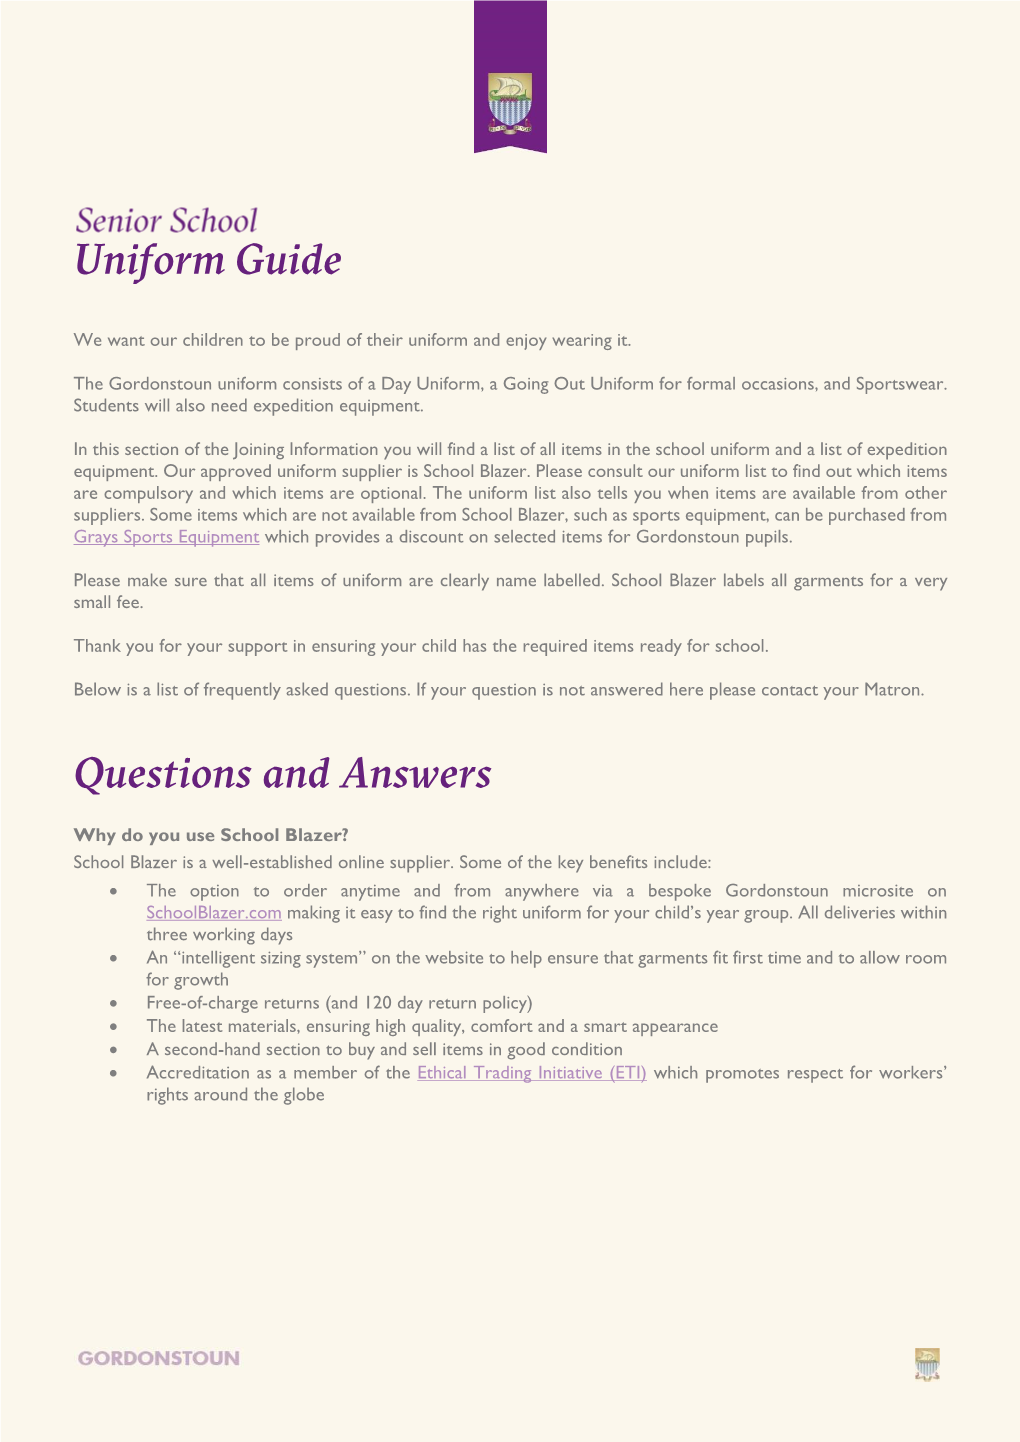 Uniform Guide Questions and Answers